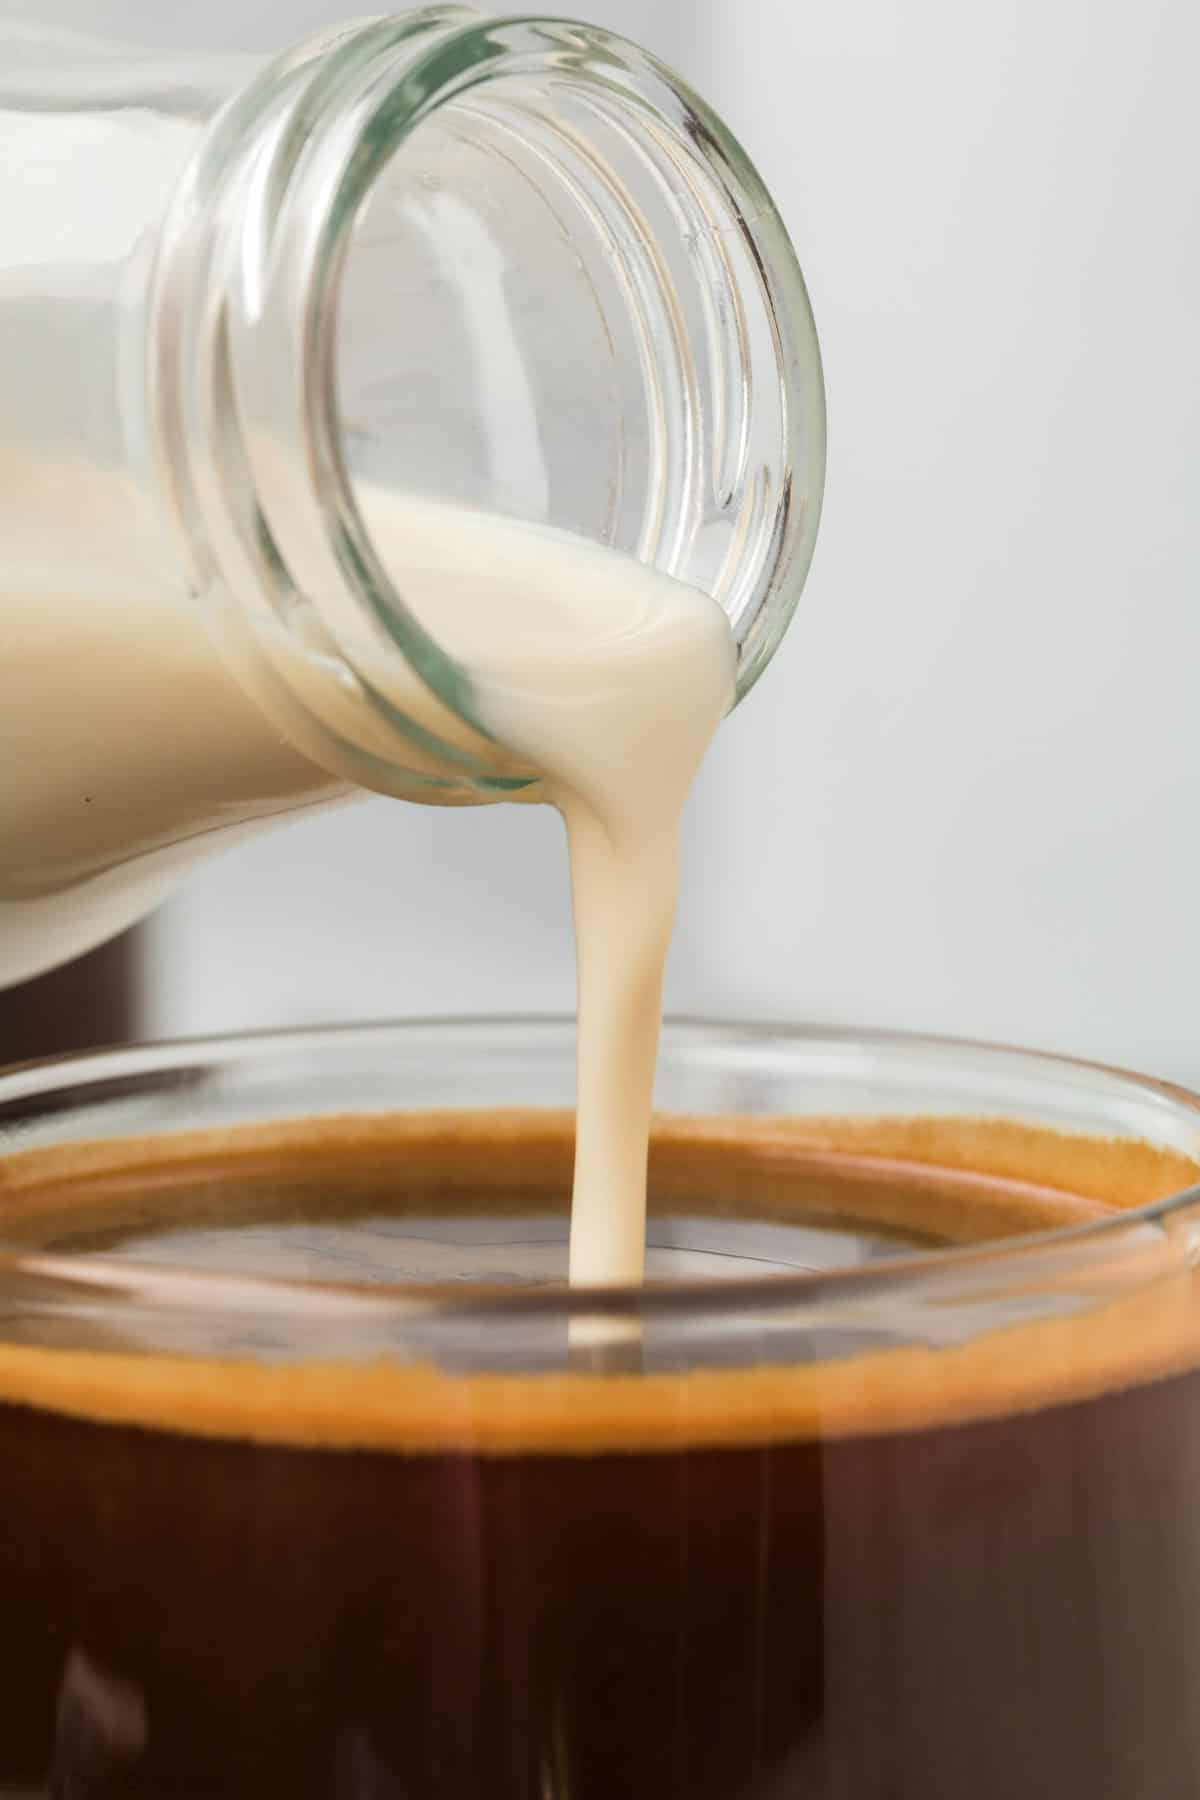 Close-up of homemade coffee creamer being poured from a glass bottle into a cup containing dark coffee. The creamy stream mingles with the rich coffee, creating a striking contrast between the light cream and the dark brew. The background is blurred and neutral-toned.